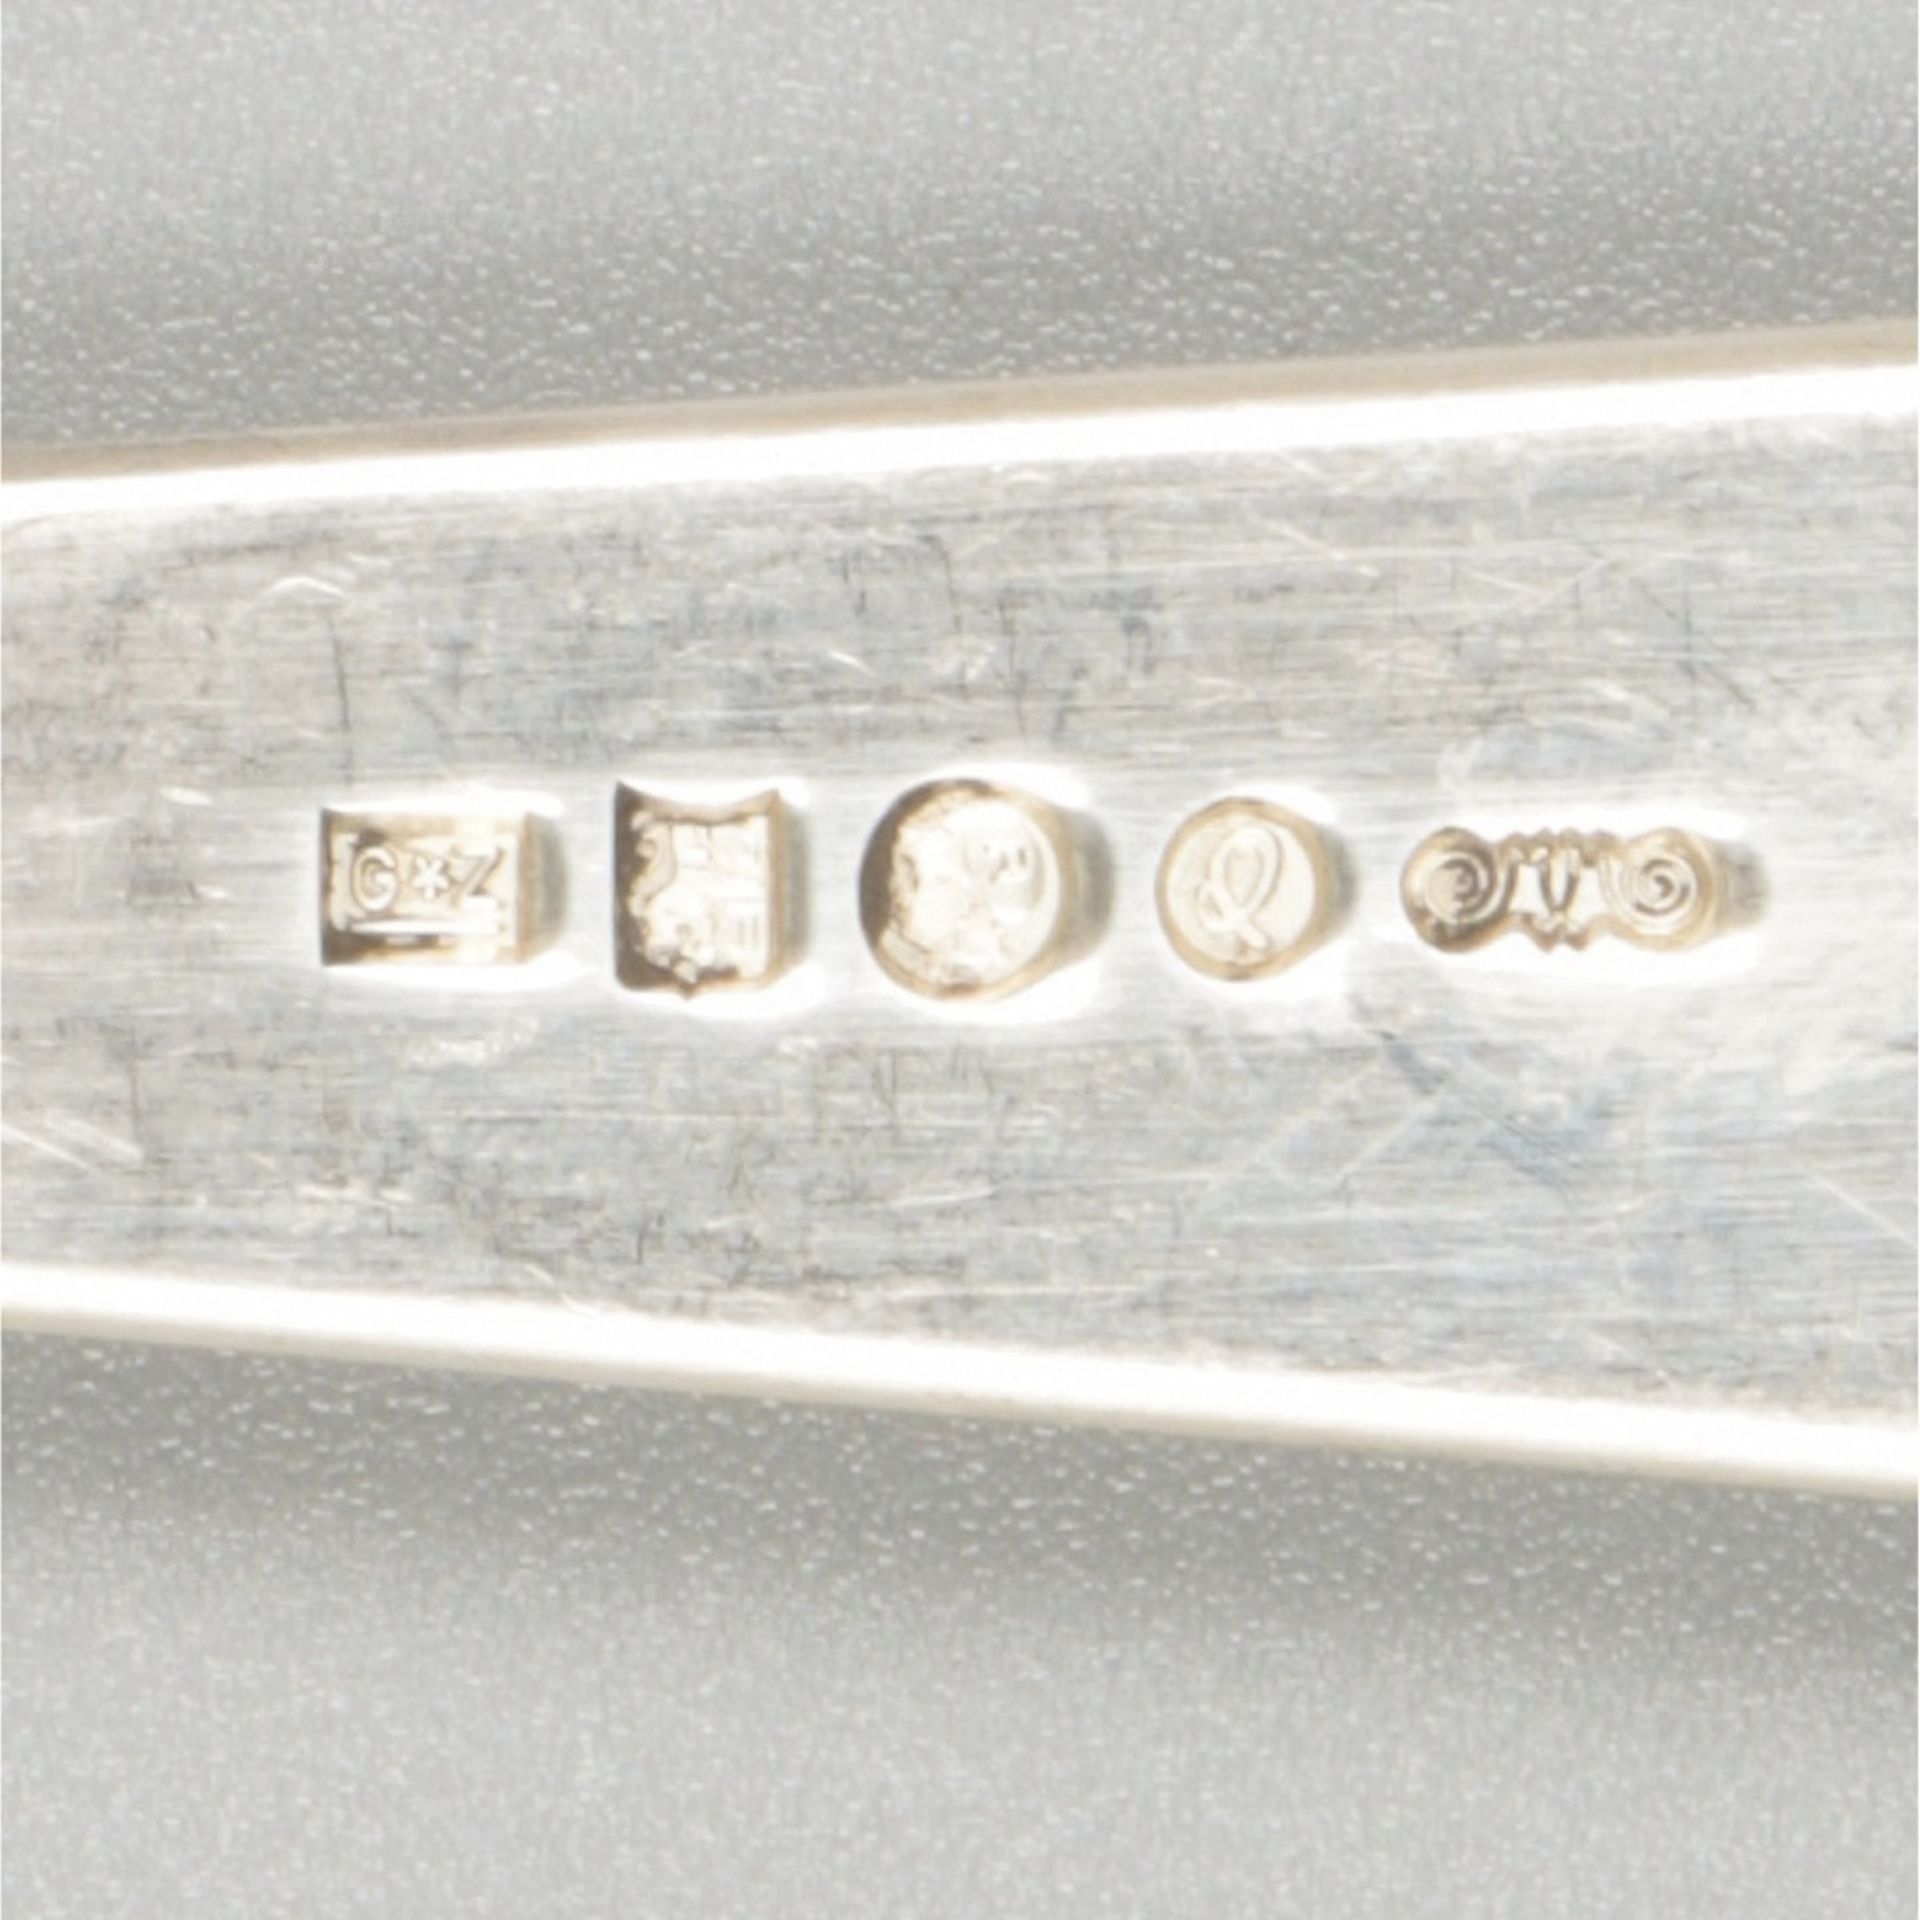 6-piece set of forks ''Haags Lofje'' silver. - Image 6 of 6